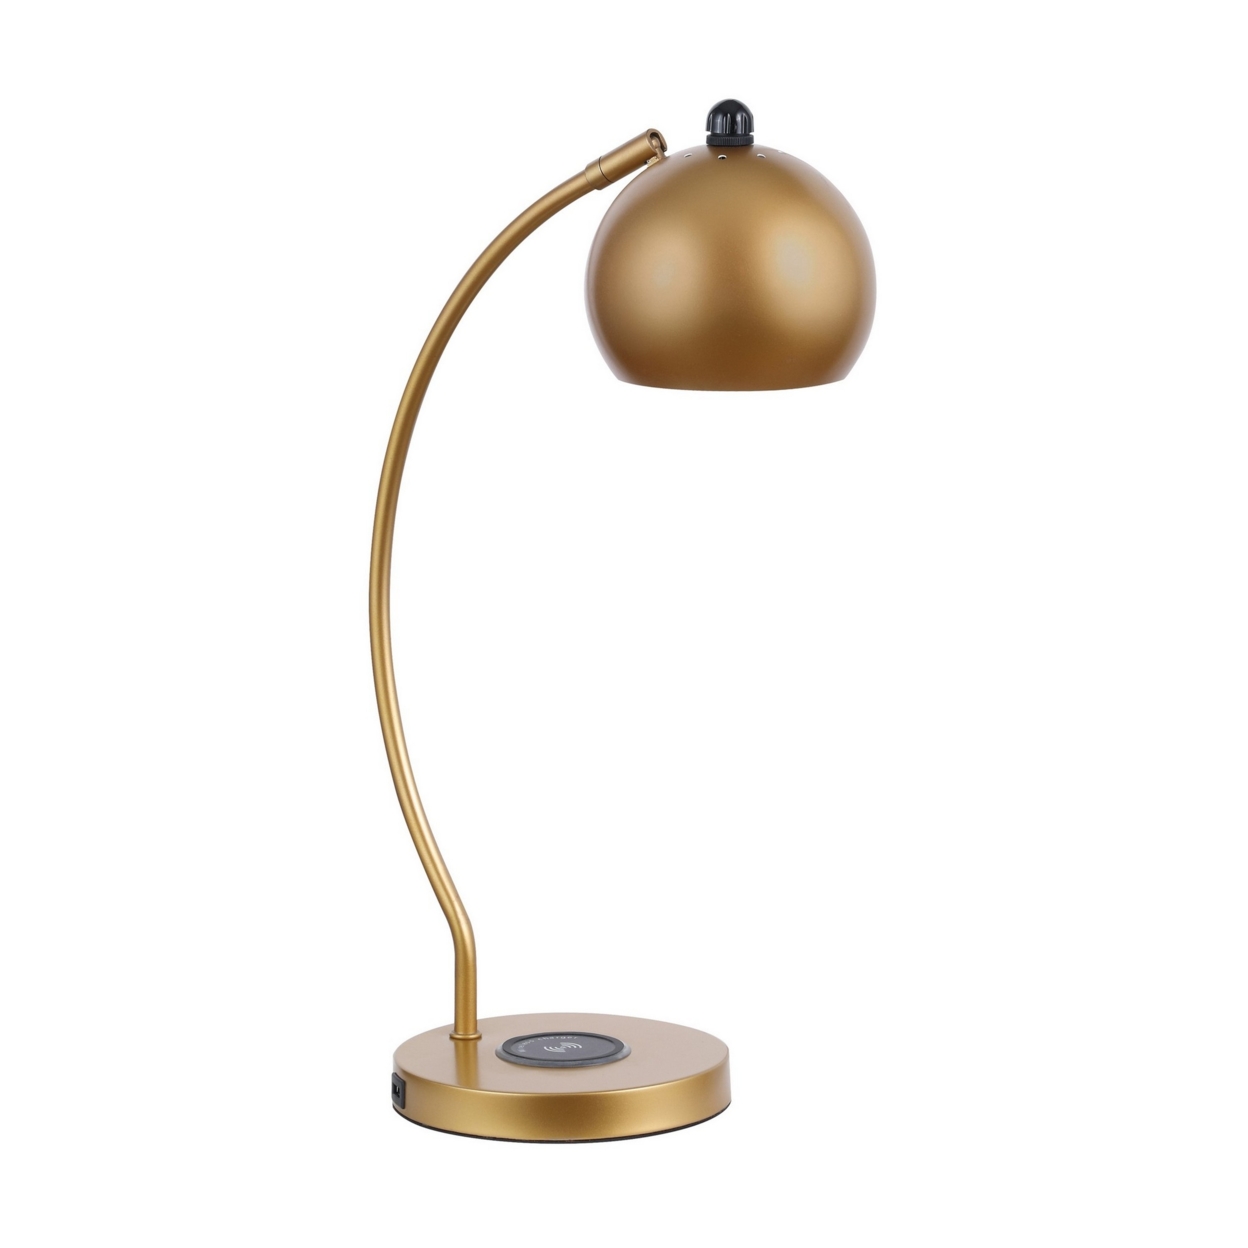 22 Inch Modern Office Table Lamp, Dome Shade, Arc Metal Base, Gold